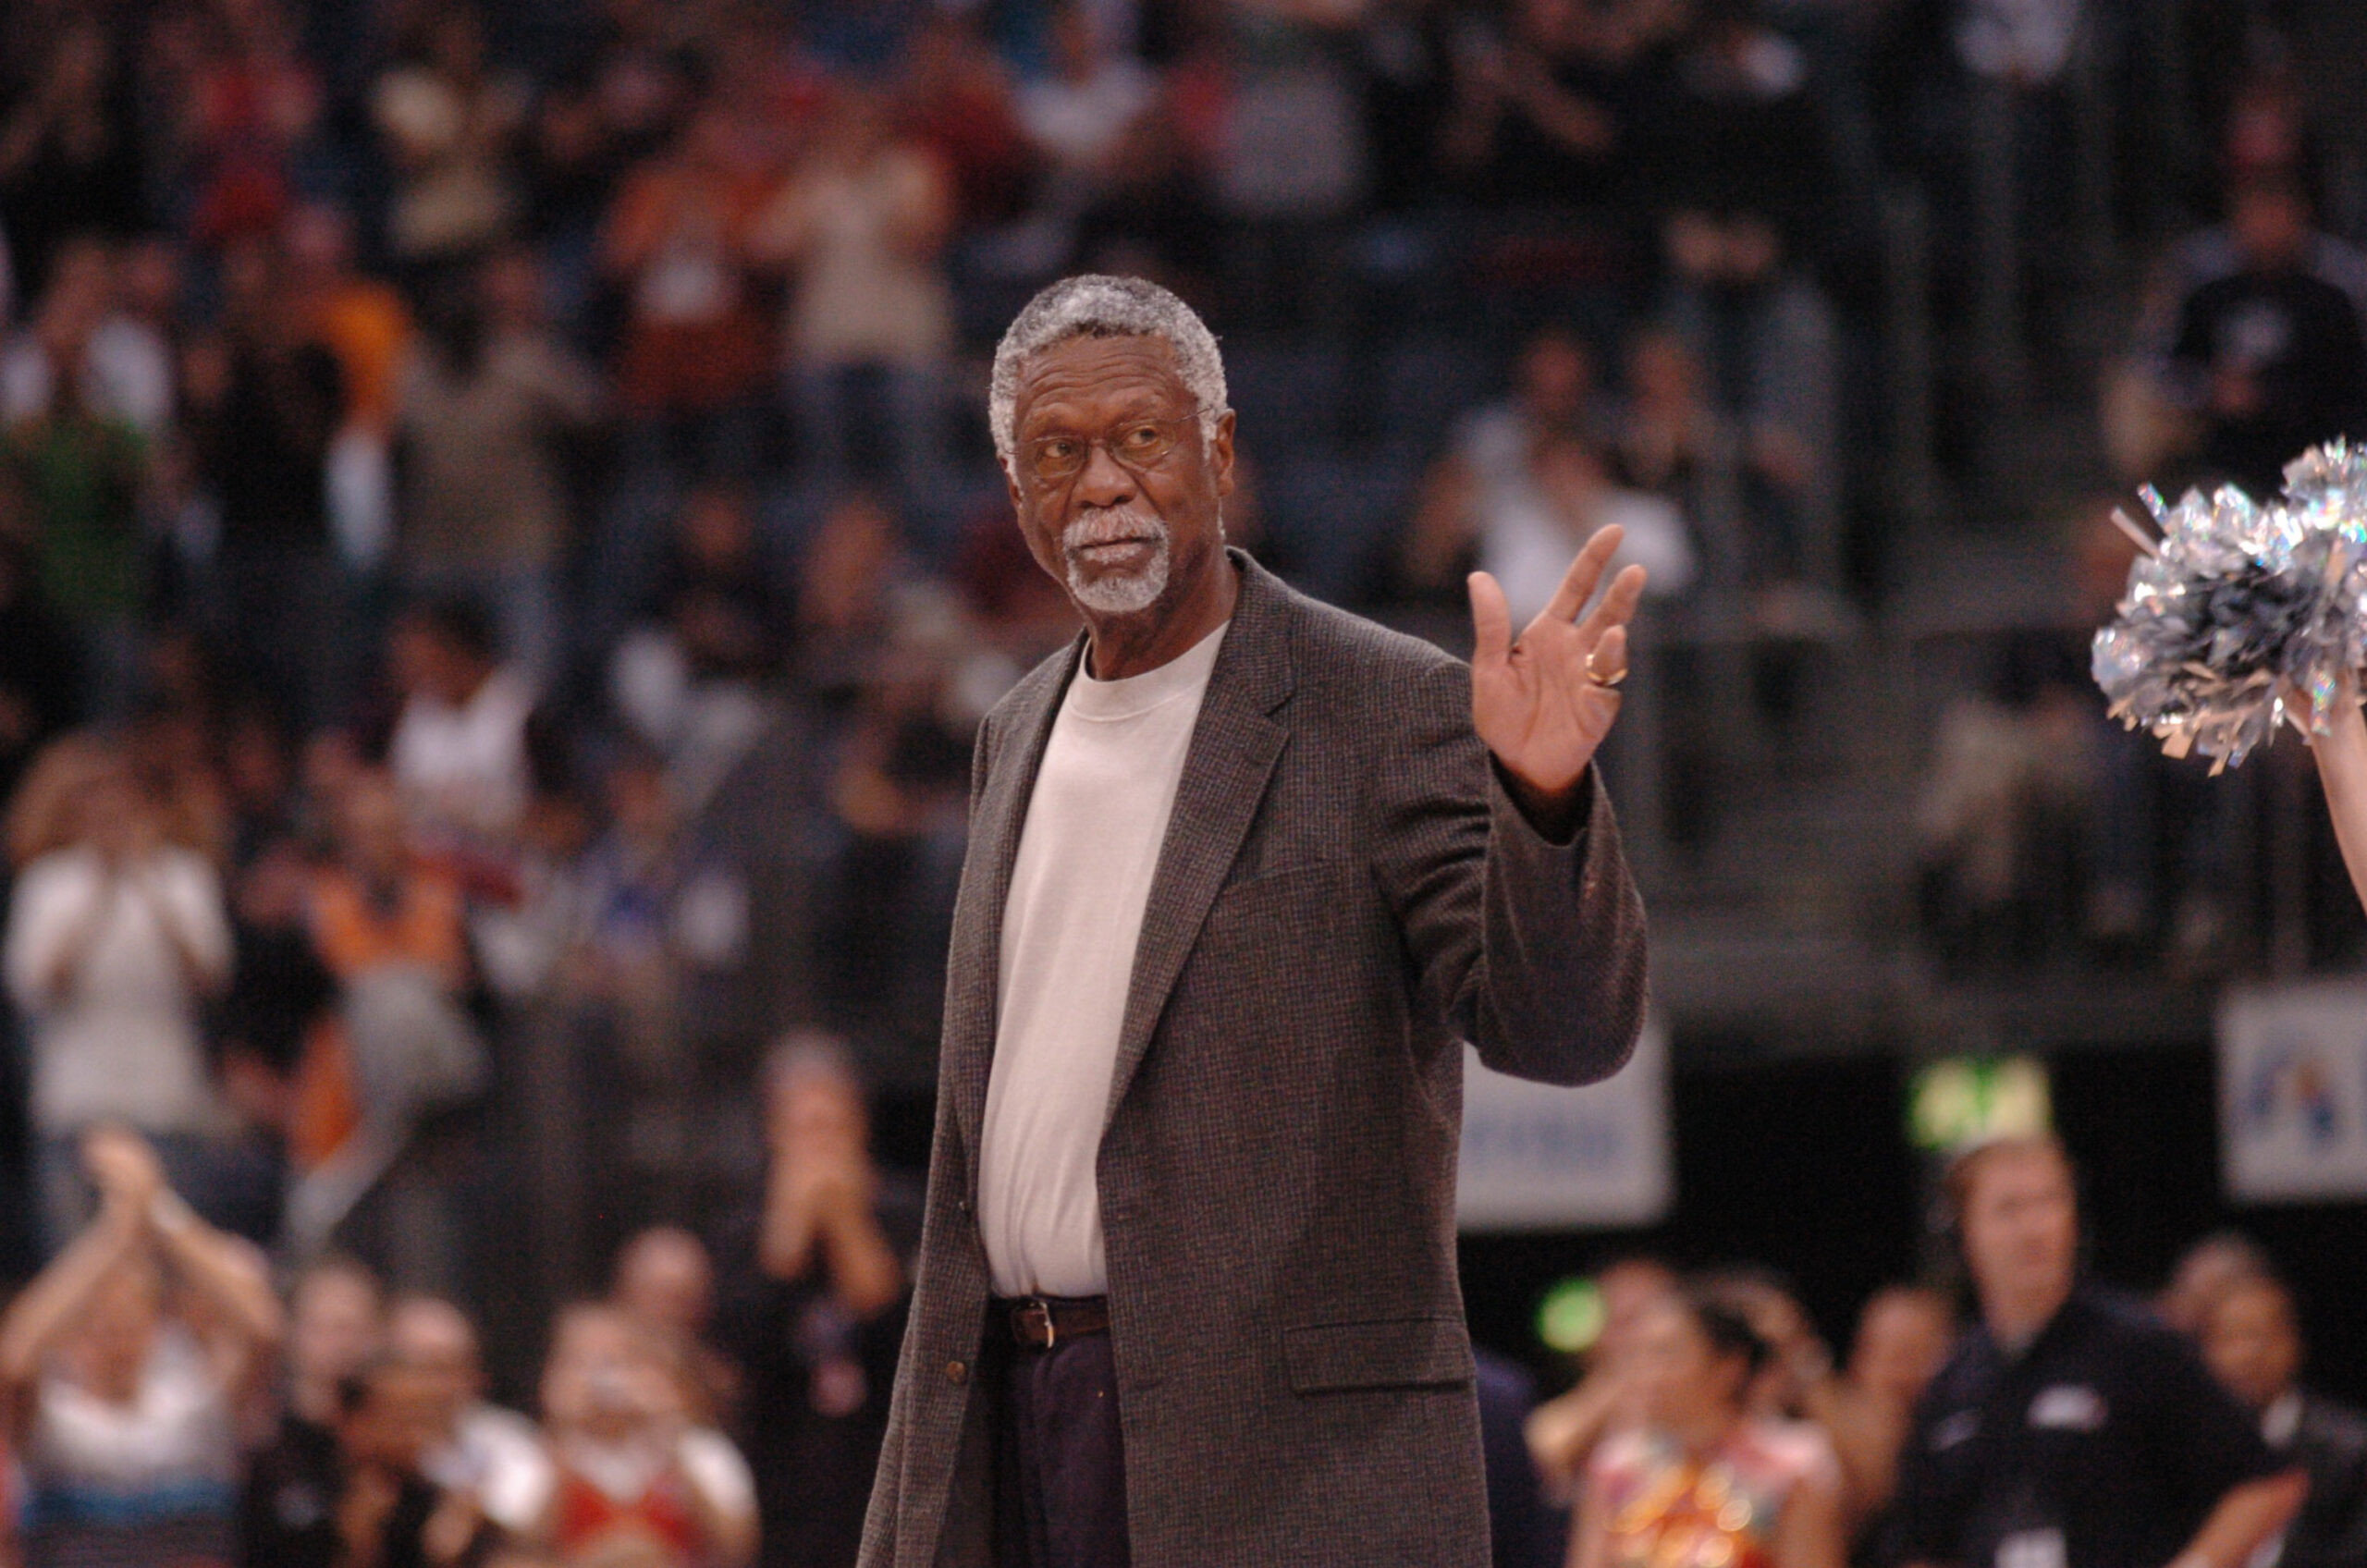 Sports world mourns loss of NBA legend Bill Russell, 11-time champion with  the Boston Celtics, Civil Rights activist - Boston News, Weather, Sports